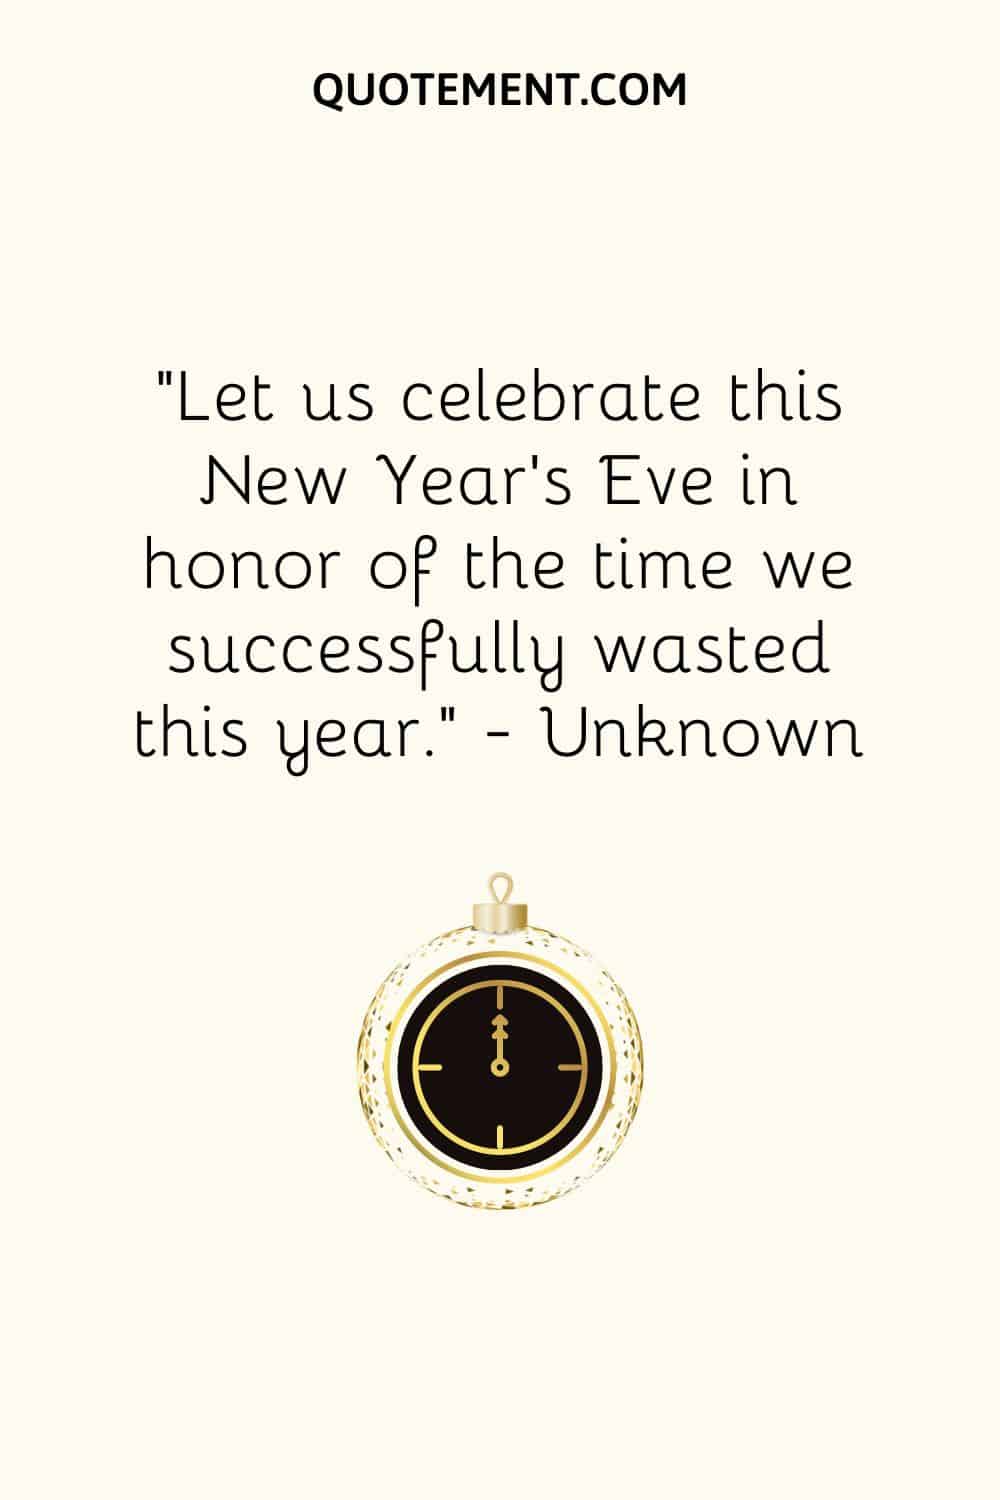 “Let us celebrate this New Year’s Eve in honor of the time we successfully wasted this year.” — Unknown